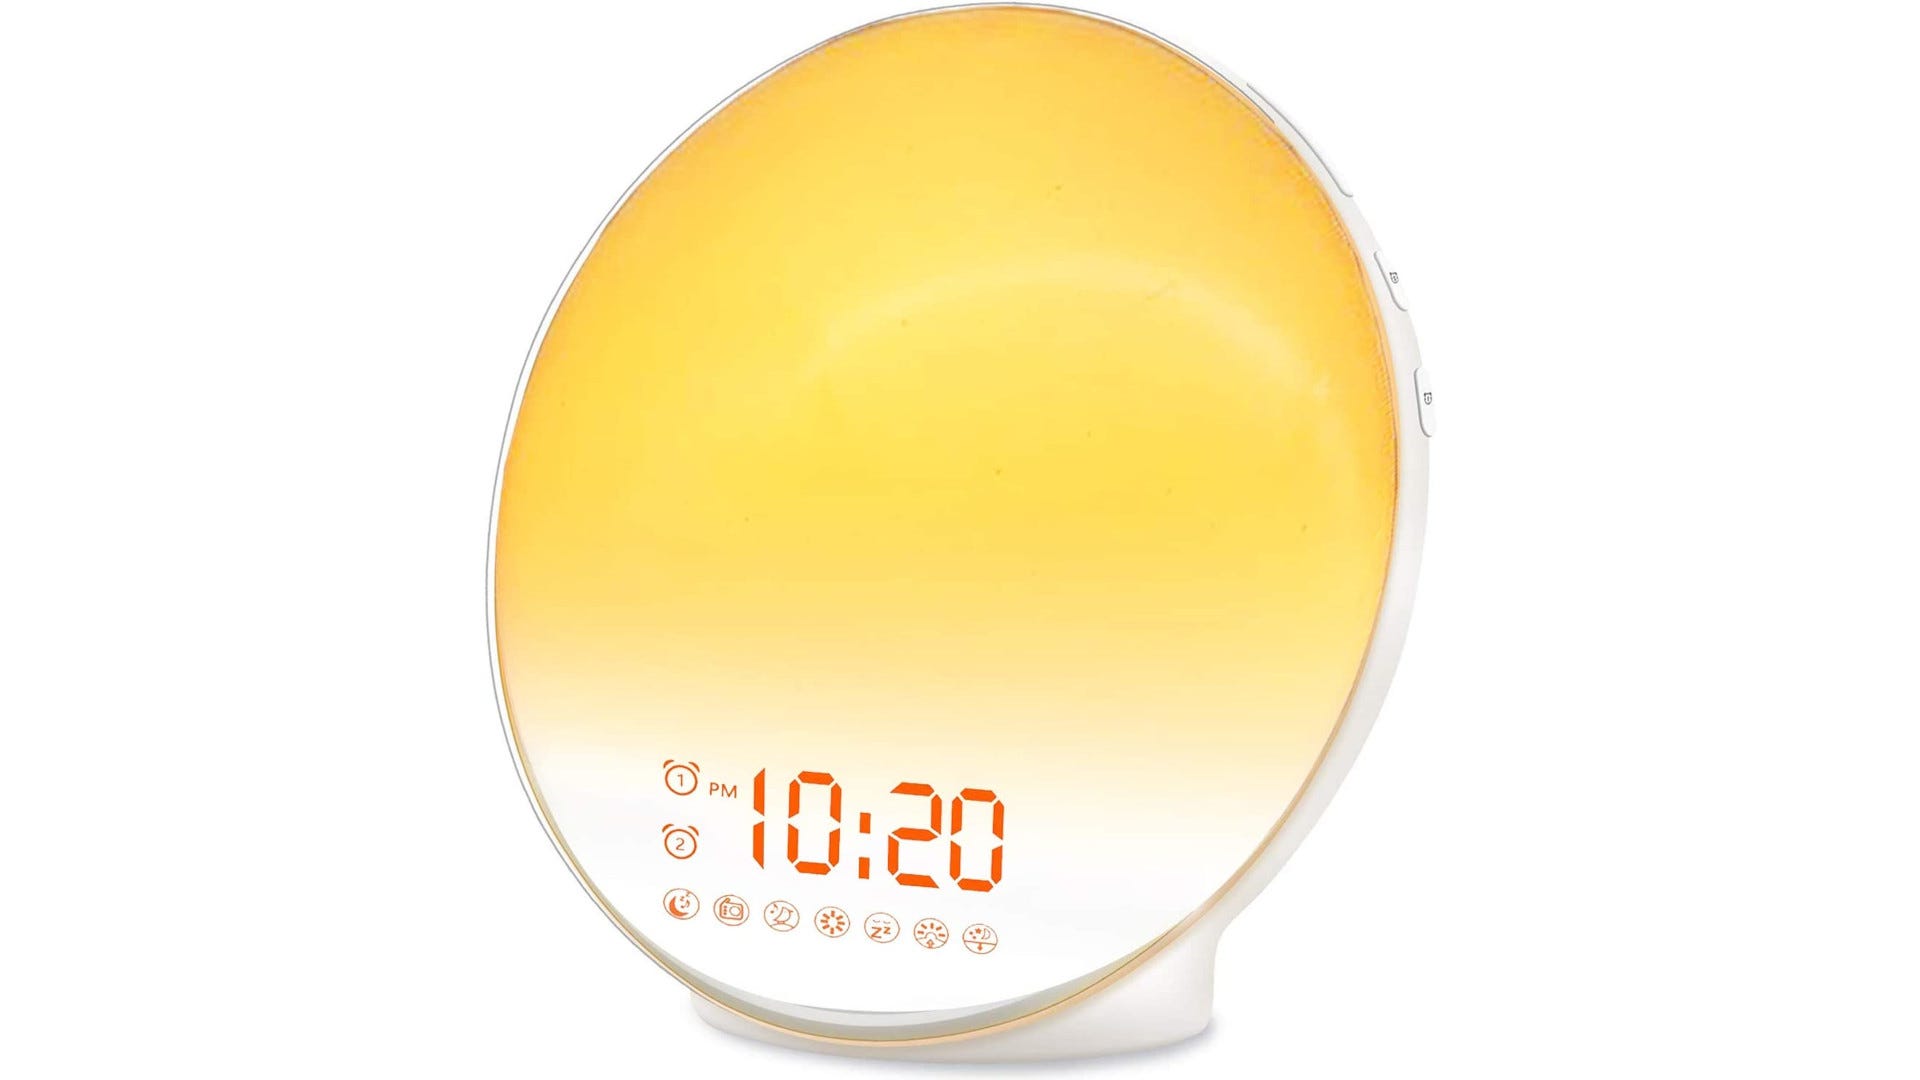 A JALL Sunrise Alarm Clock sits on a white surface.